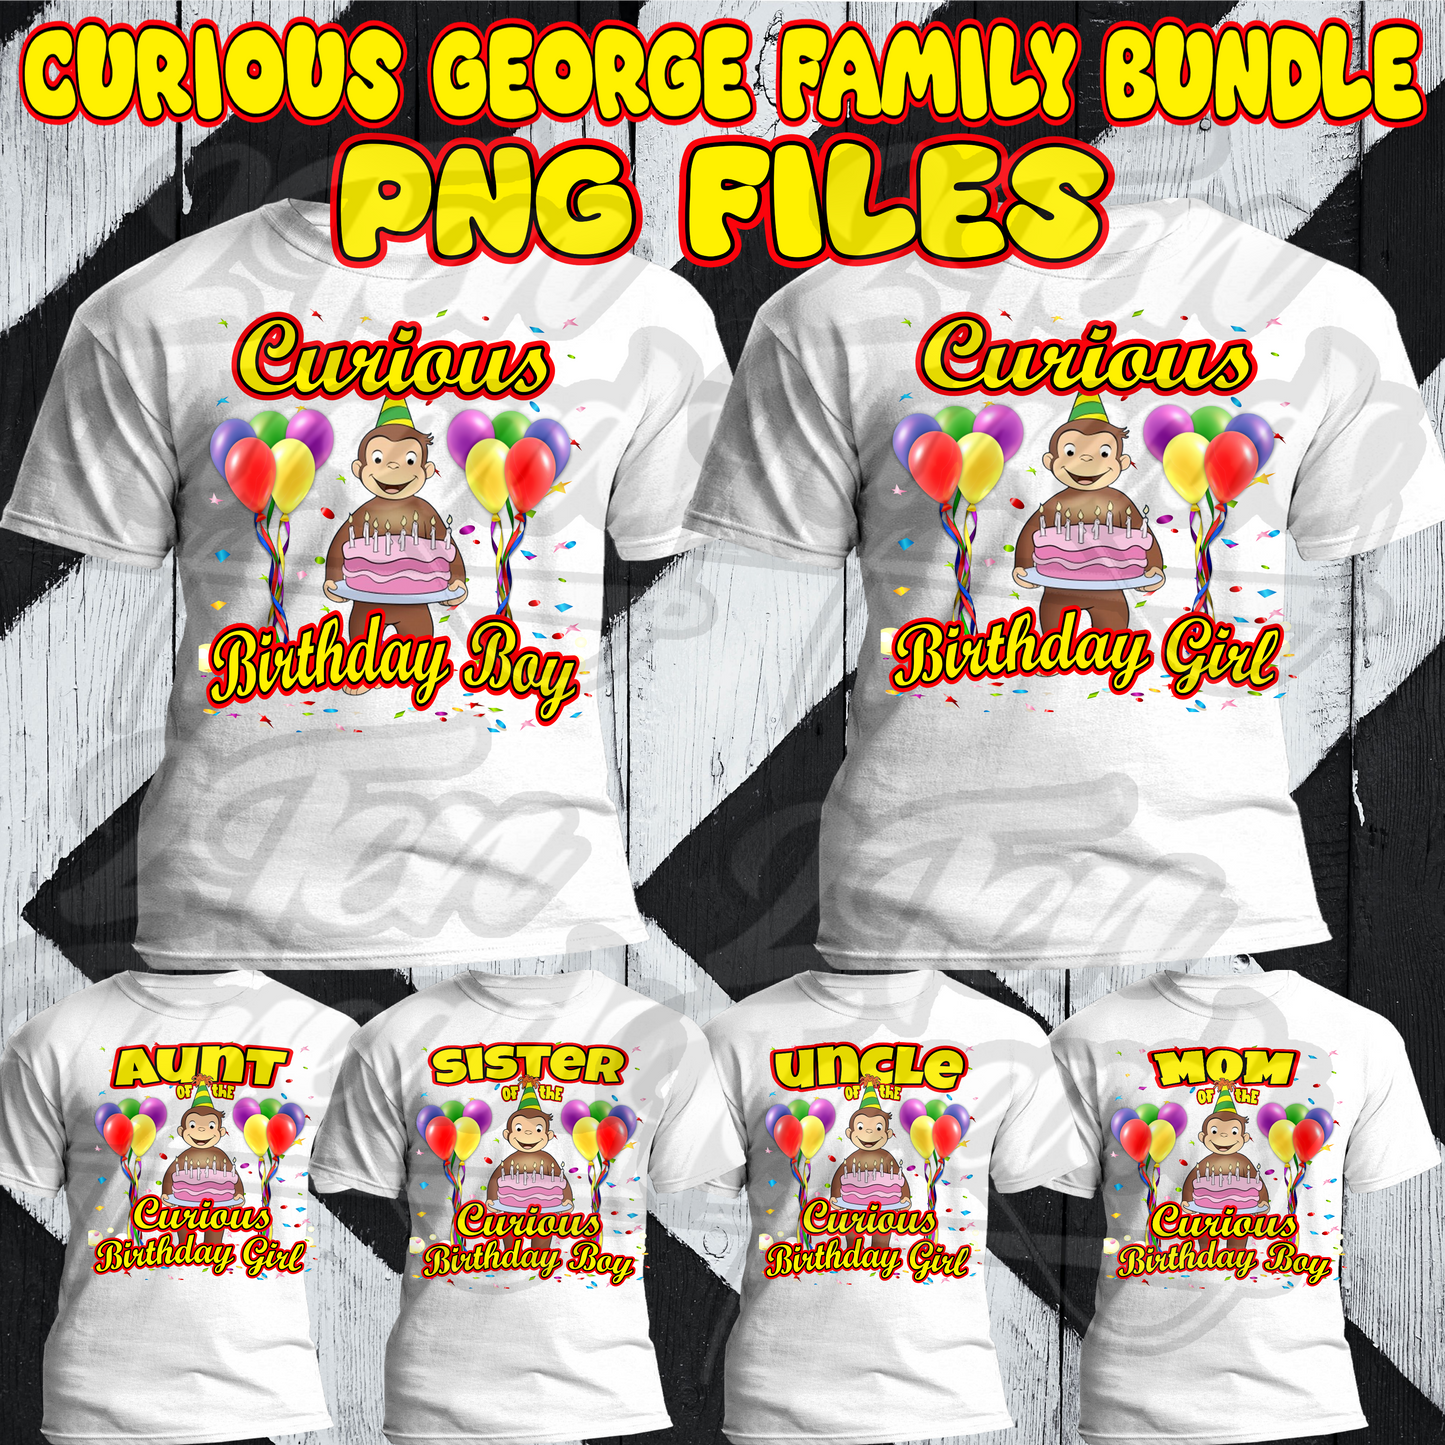 Custom Curious George Birthday Bundle Family PNG Files!